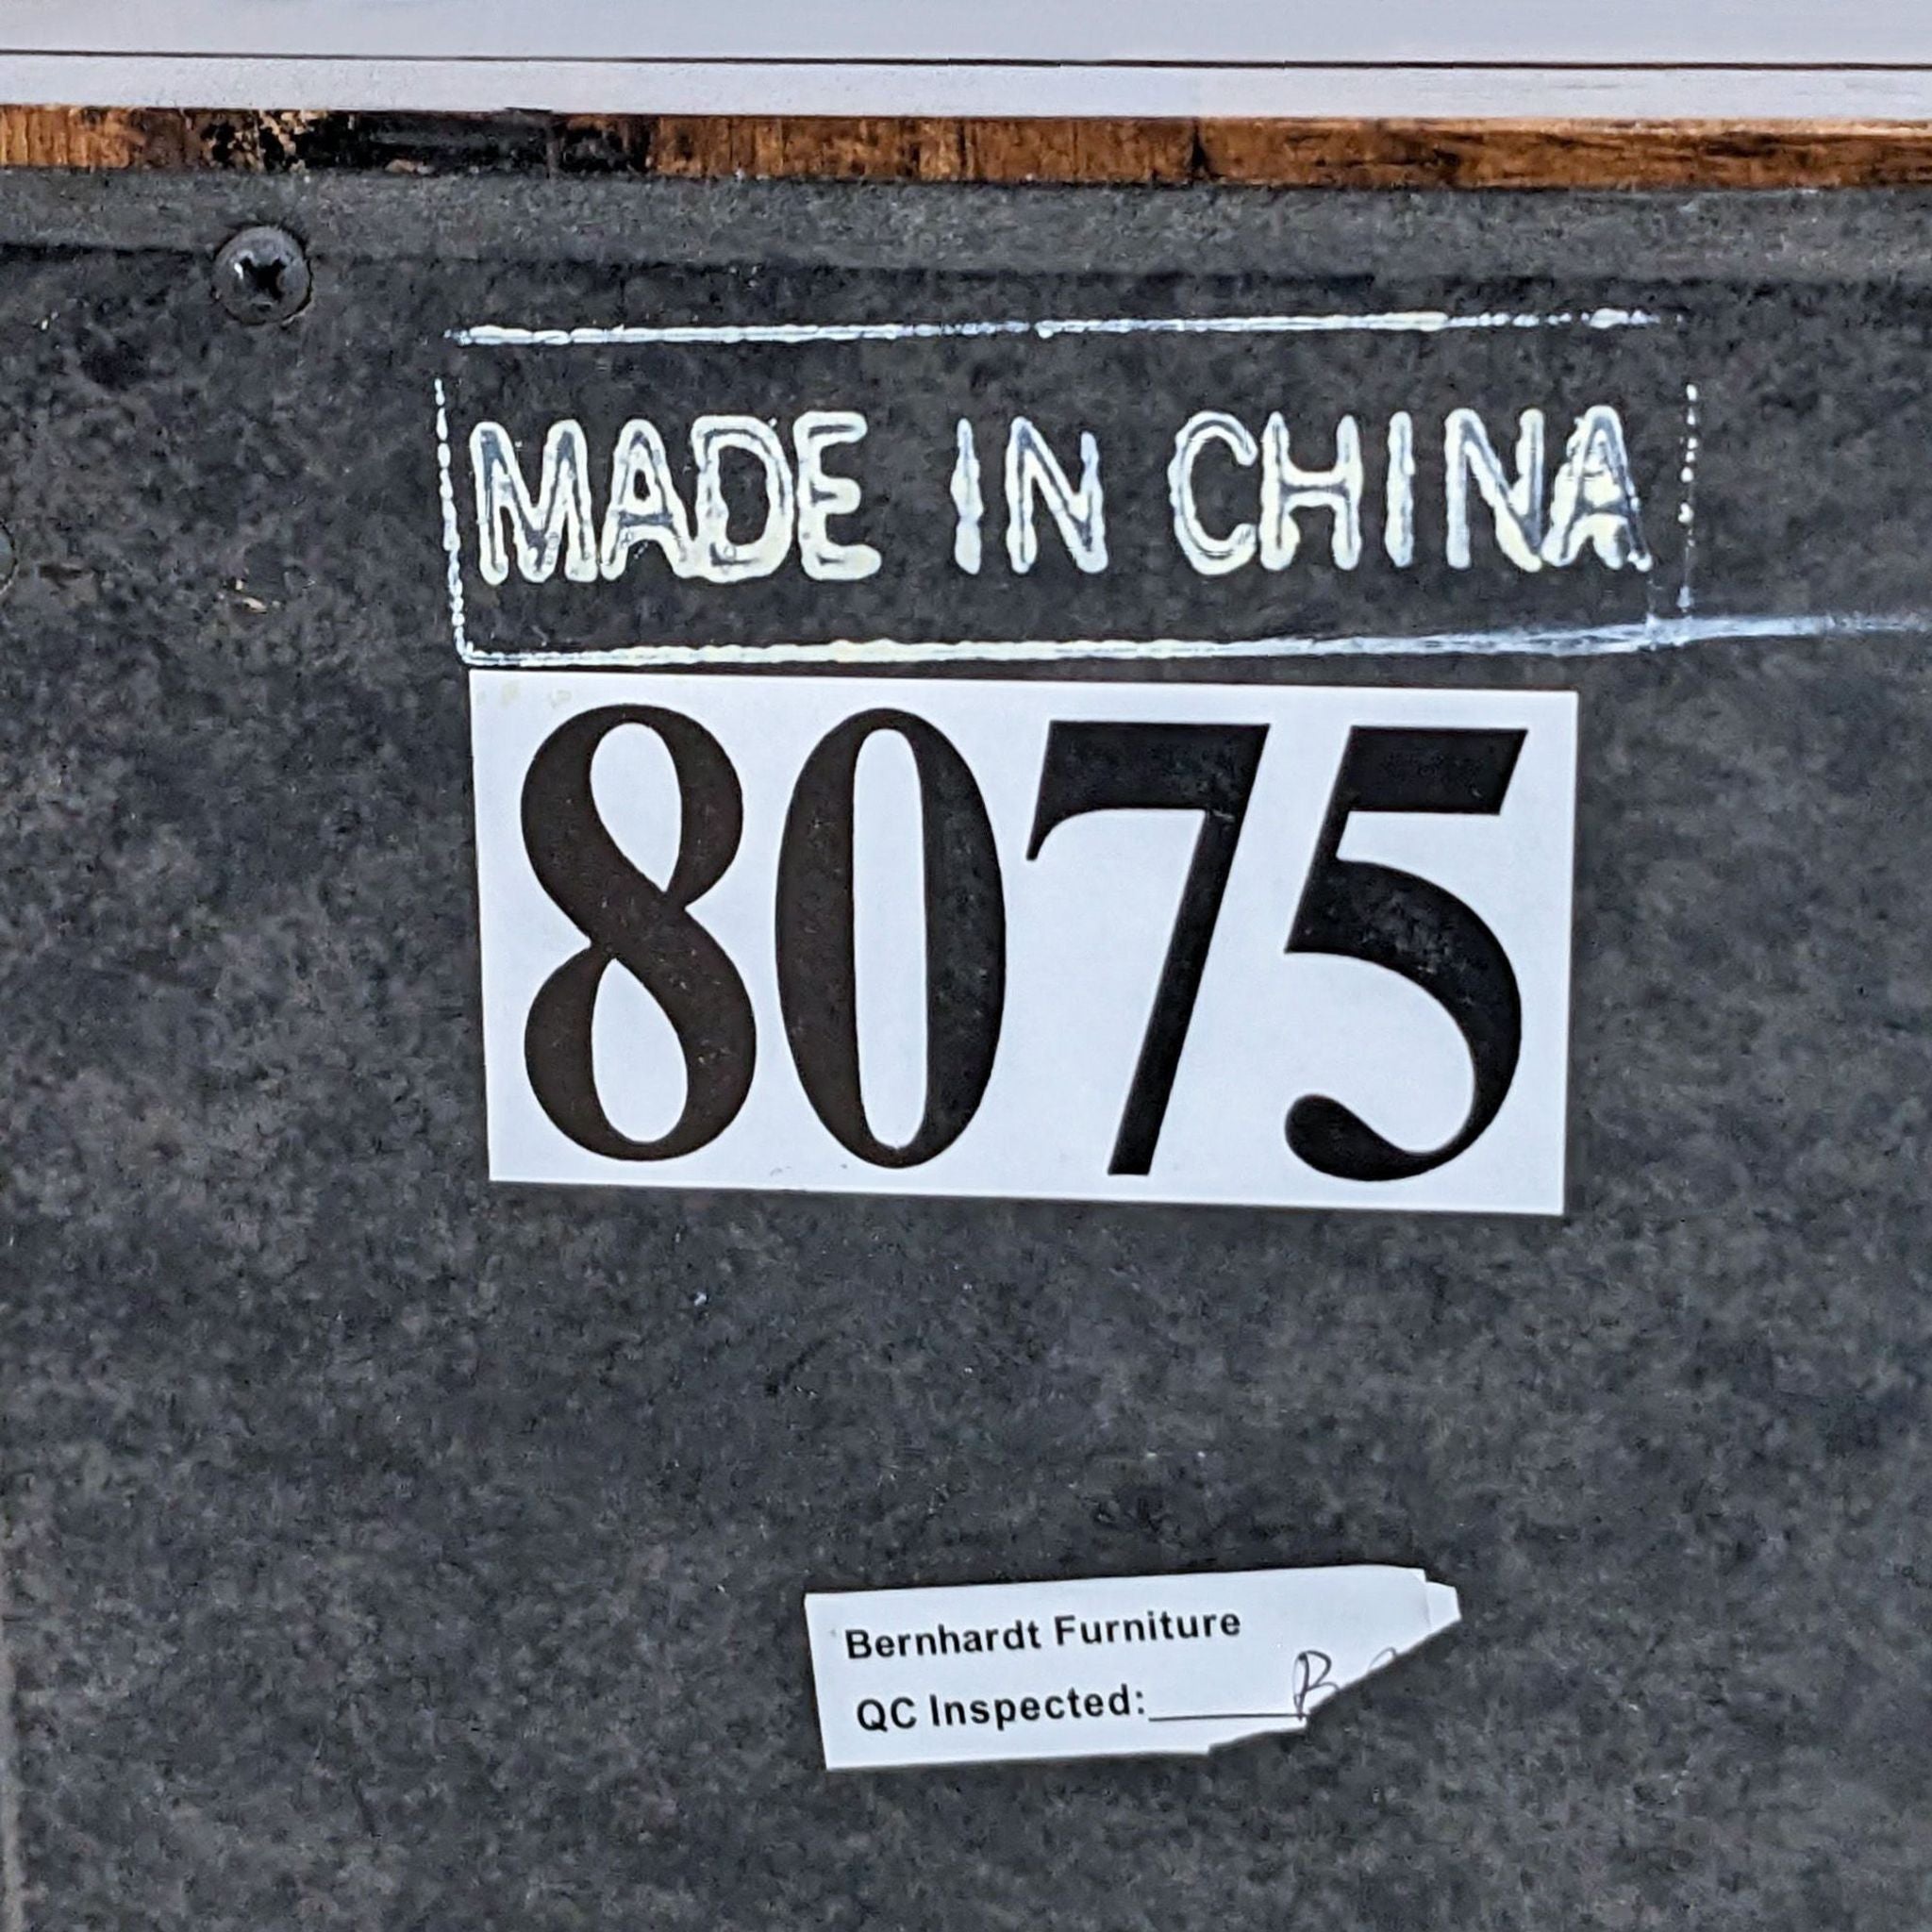 Label on a Bernhardt Furniture mirror indicating "Made in China" and quality control approval with a number 8075.